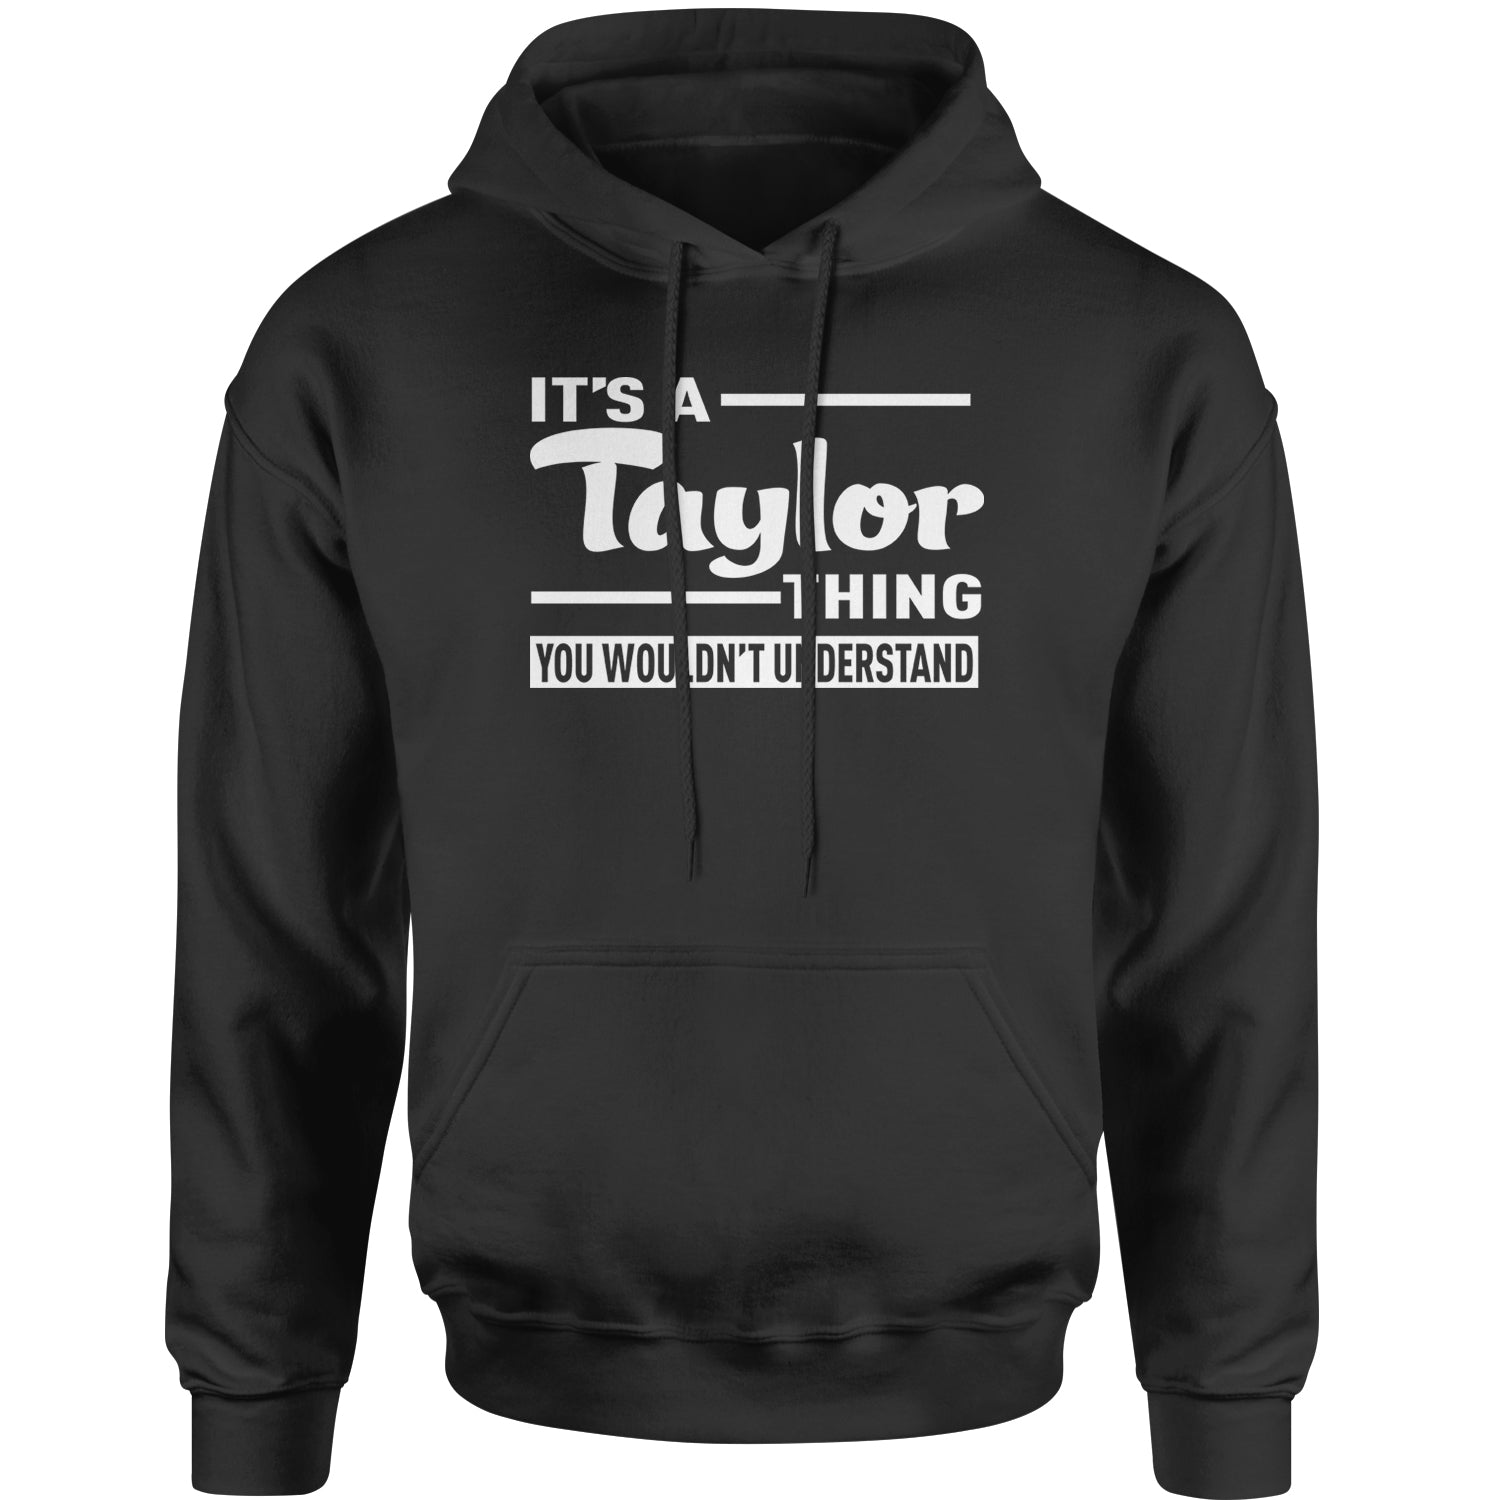 It's A Taylor Thing, You Wouldn't Understand Adult Hoodie Sweatshirt nation, taylornation by Expression Tees